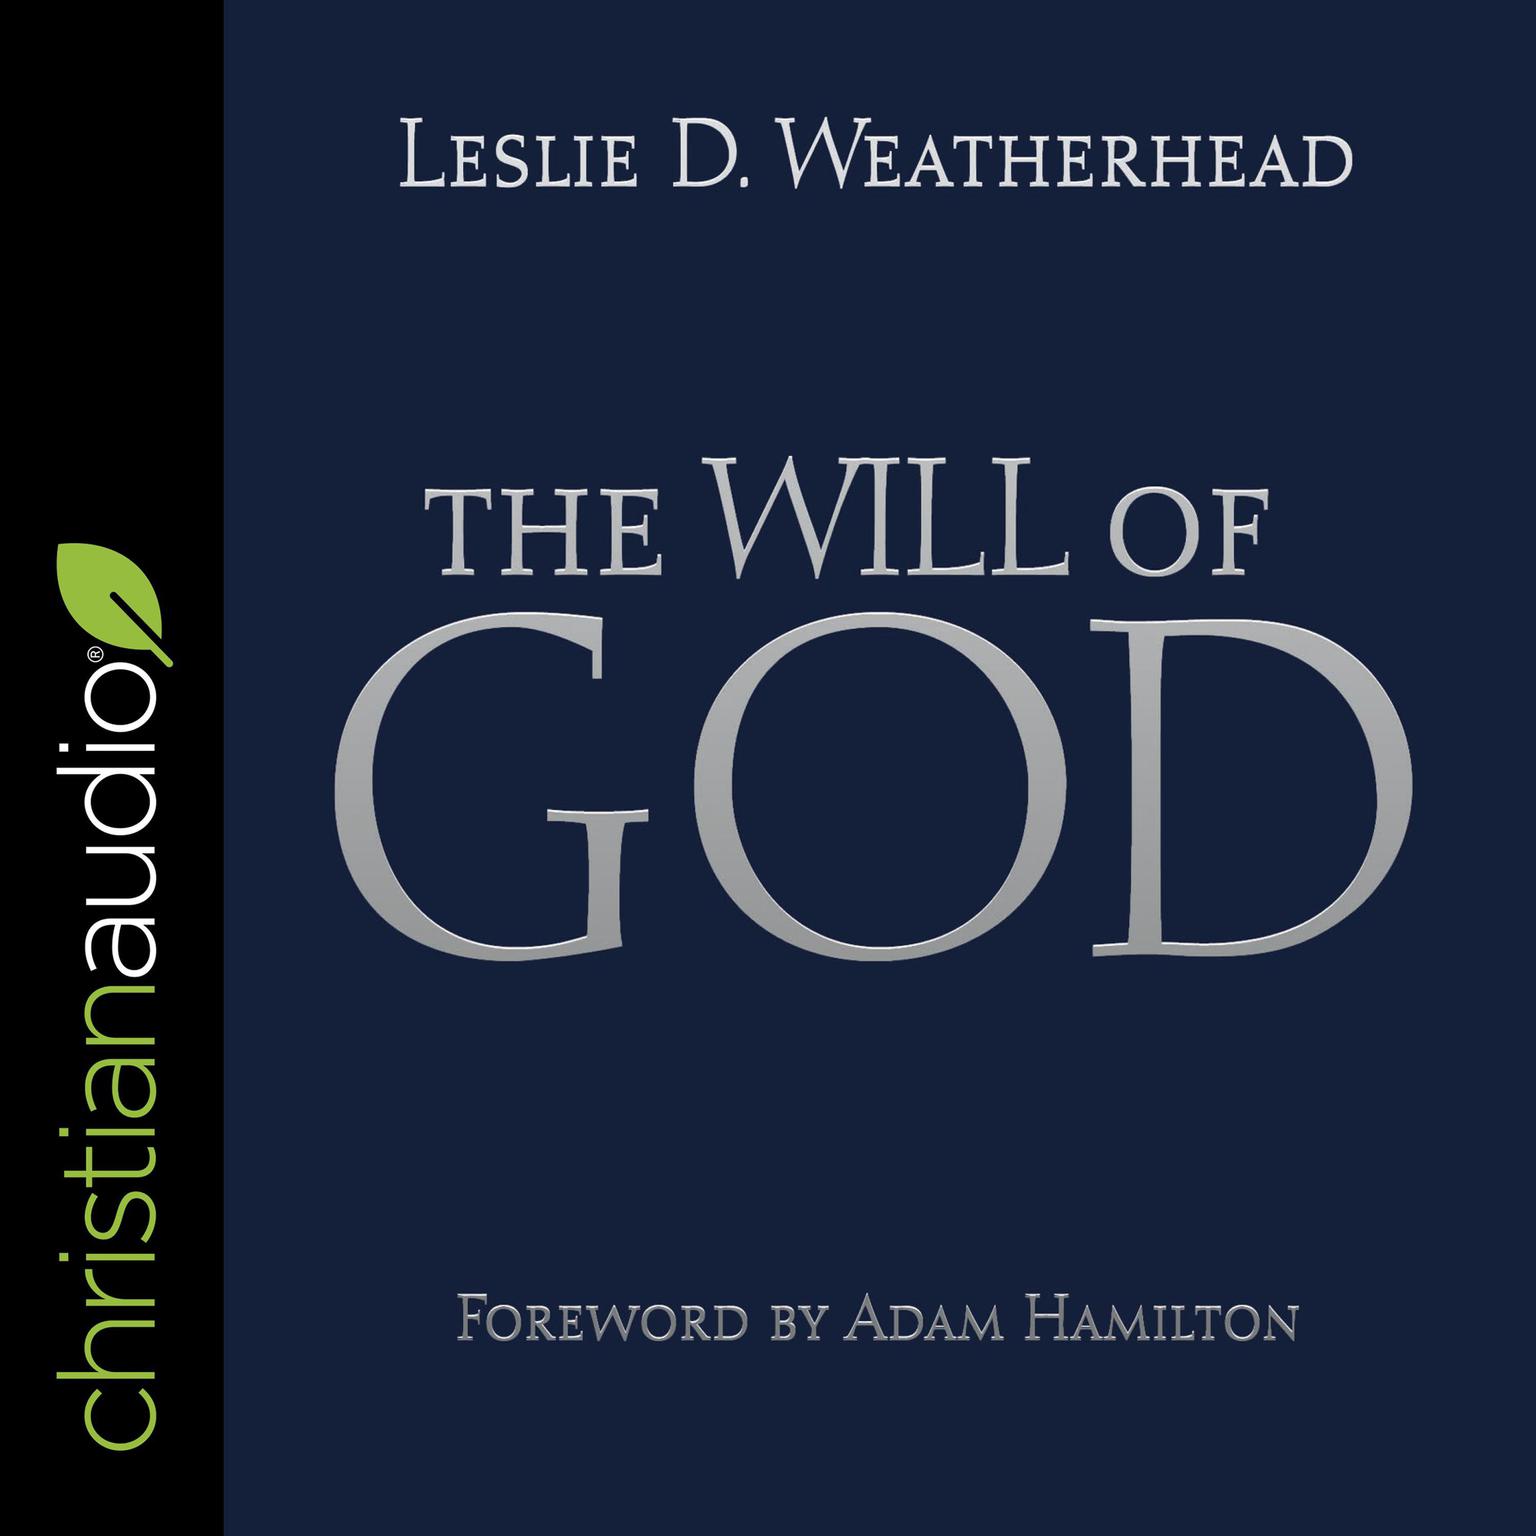 The Will of God Audiobook, by Leslie D. Weatherhead